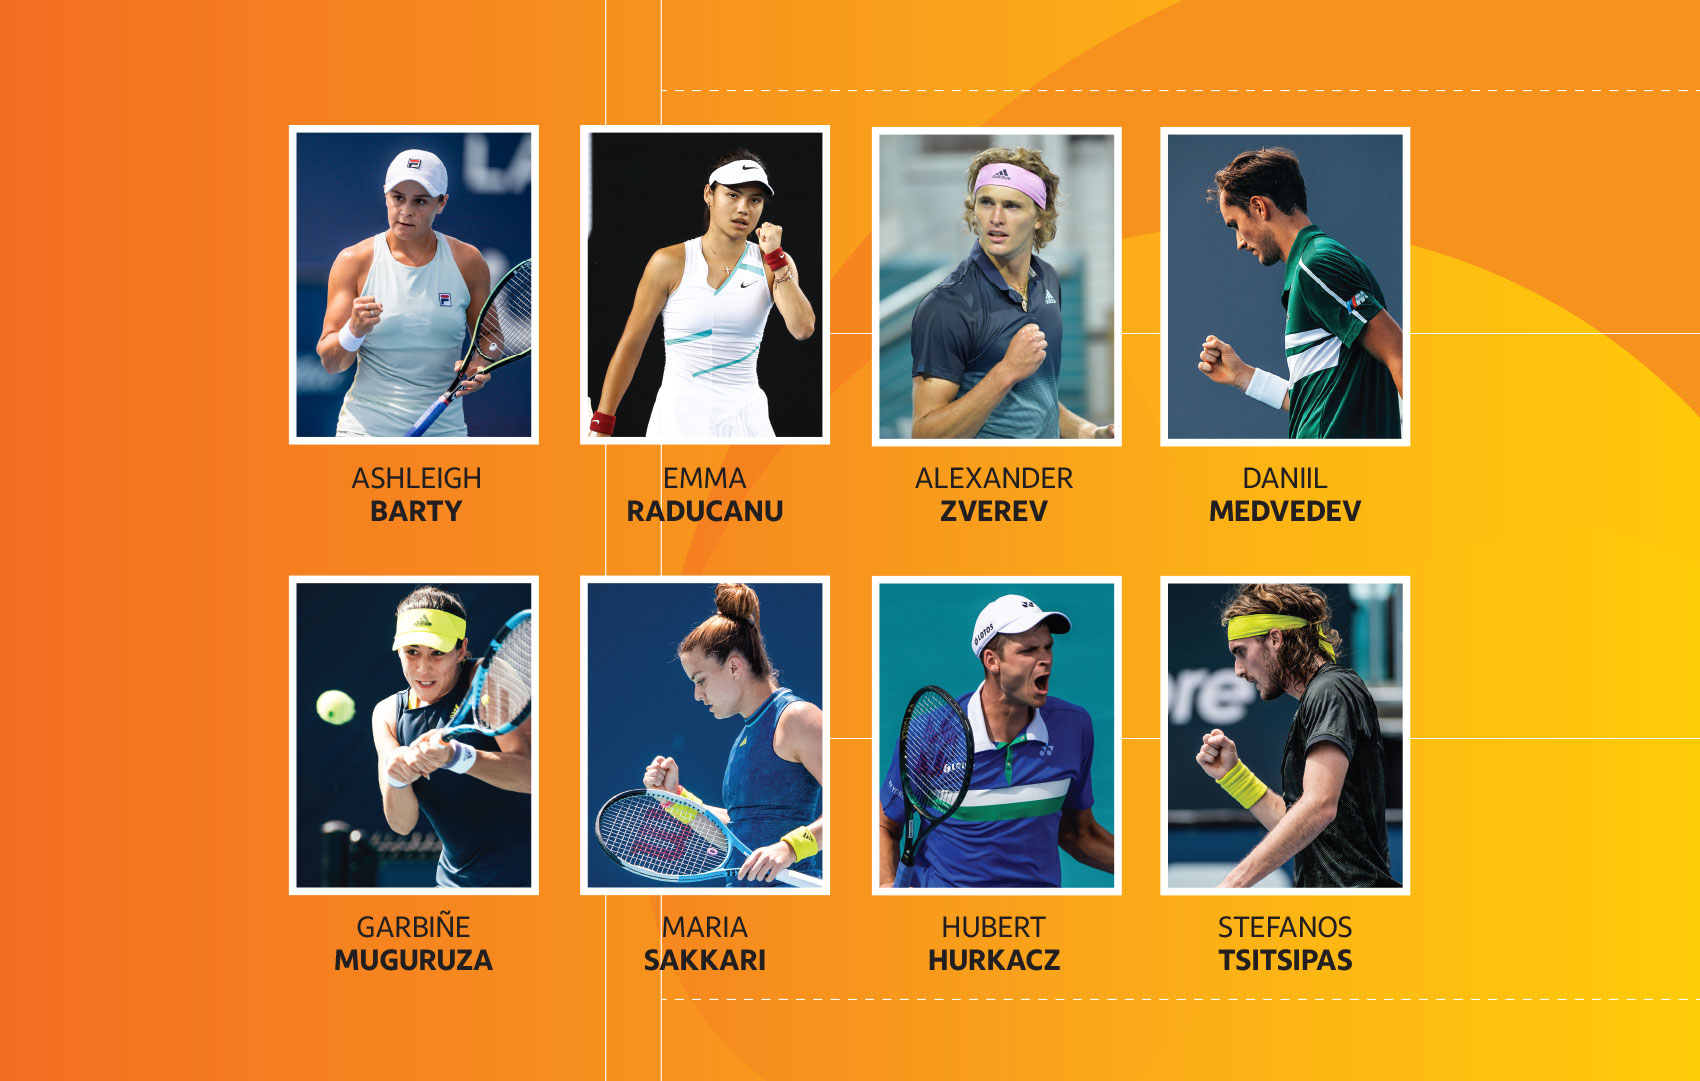 The Worlds Greatest Players Return to the Miami Open presented by Itaú